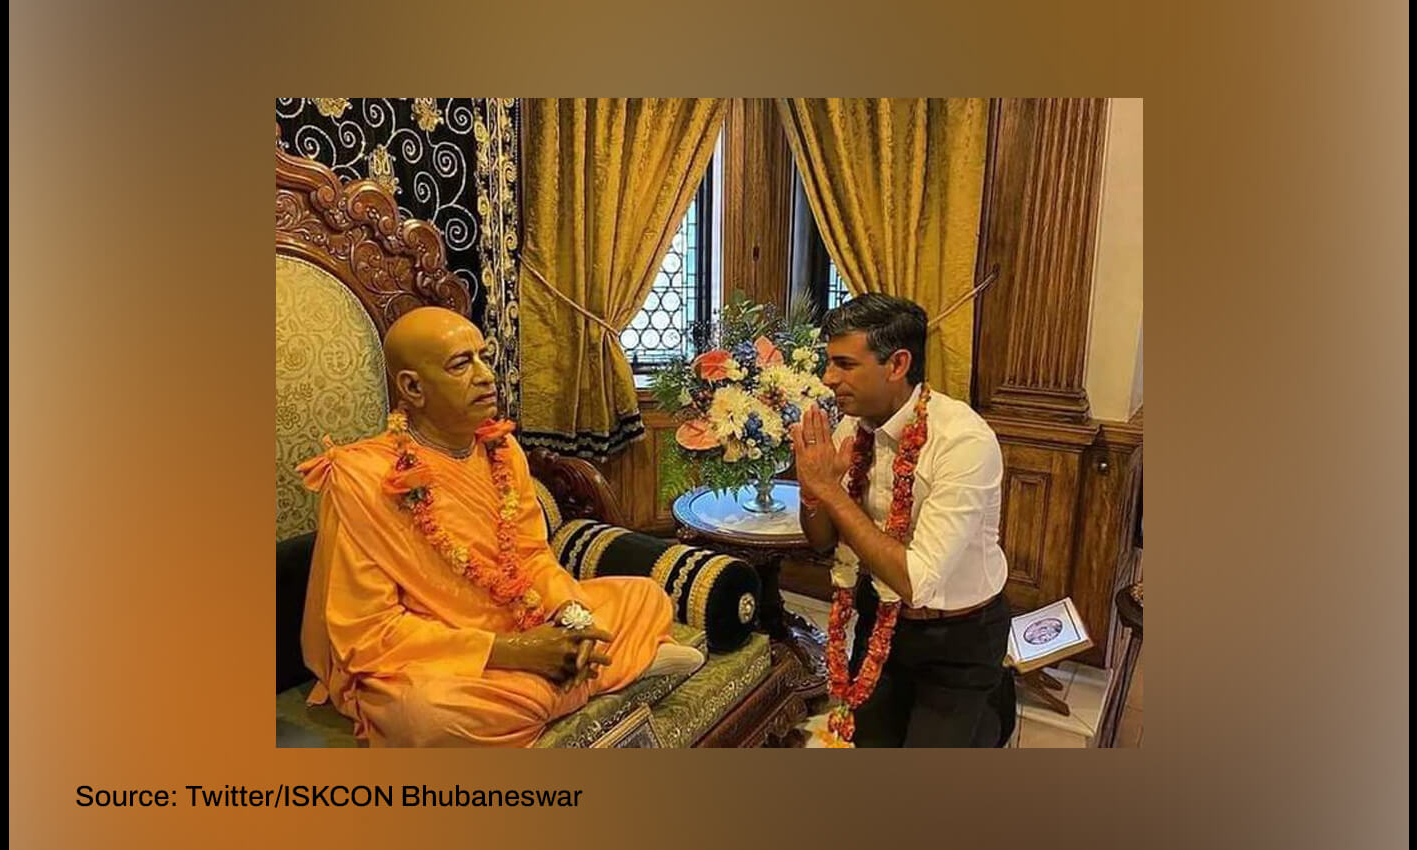 Rishi Sunak visited the Hare Krishna temple in the U.K. after being elected the prime minister.